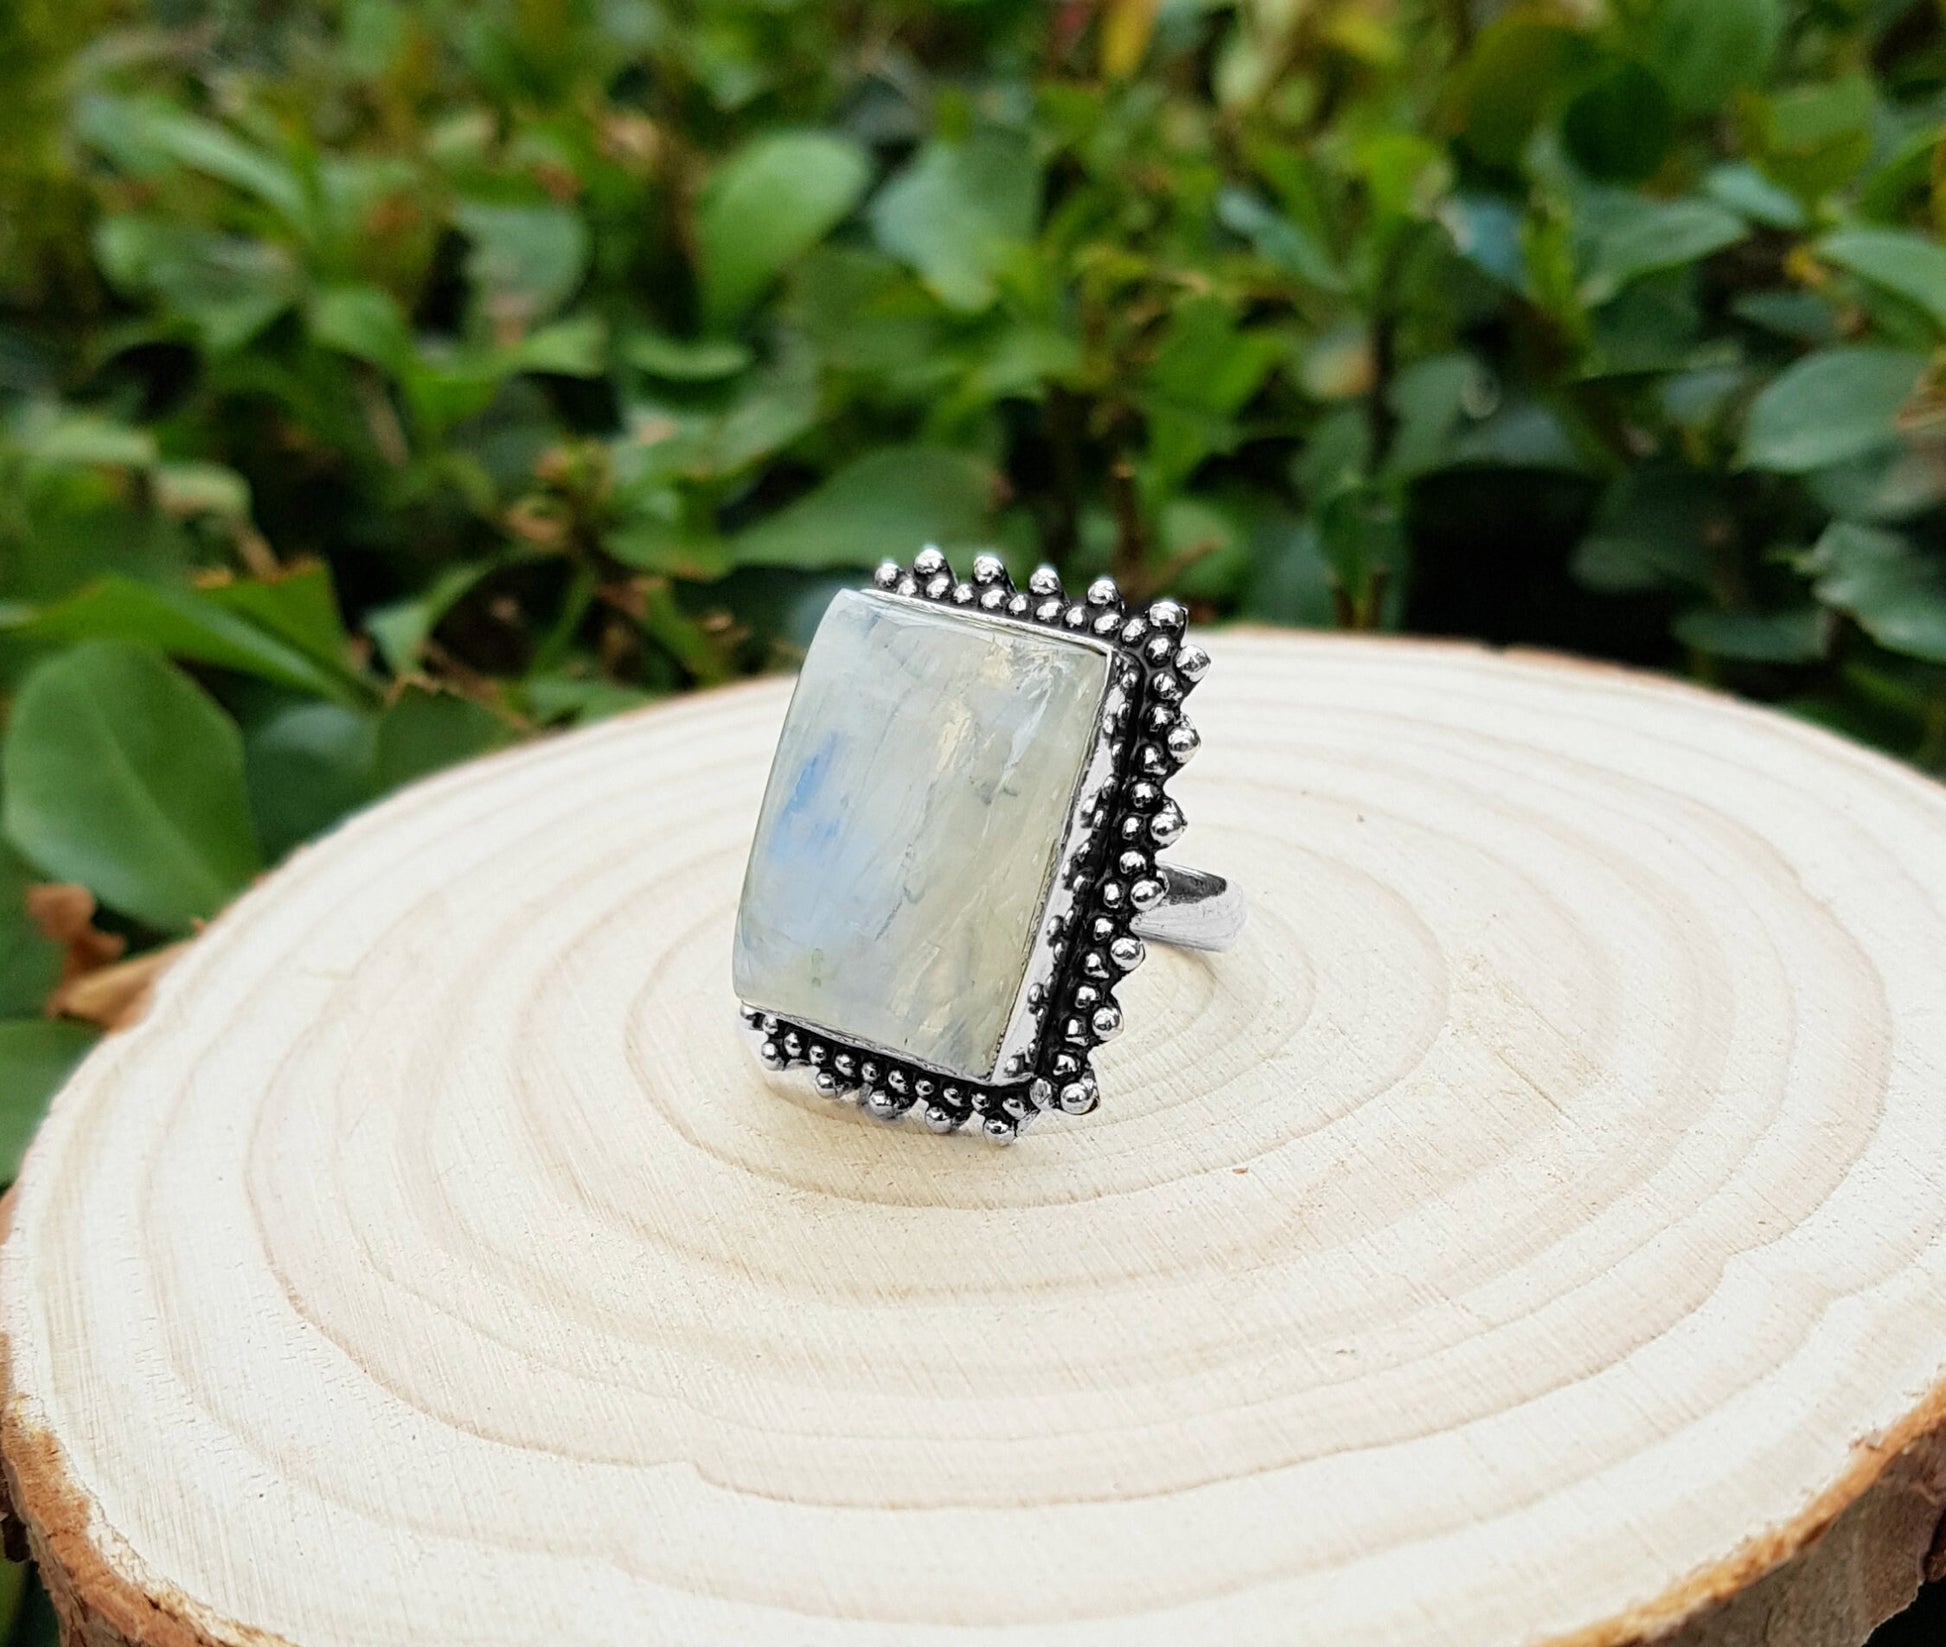 Rainbow Moonstone Statement Ring Sterling Silver Boho Rings Size US 7 Unique Jewelry One Of A Kind Gift GypsyJewelry